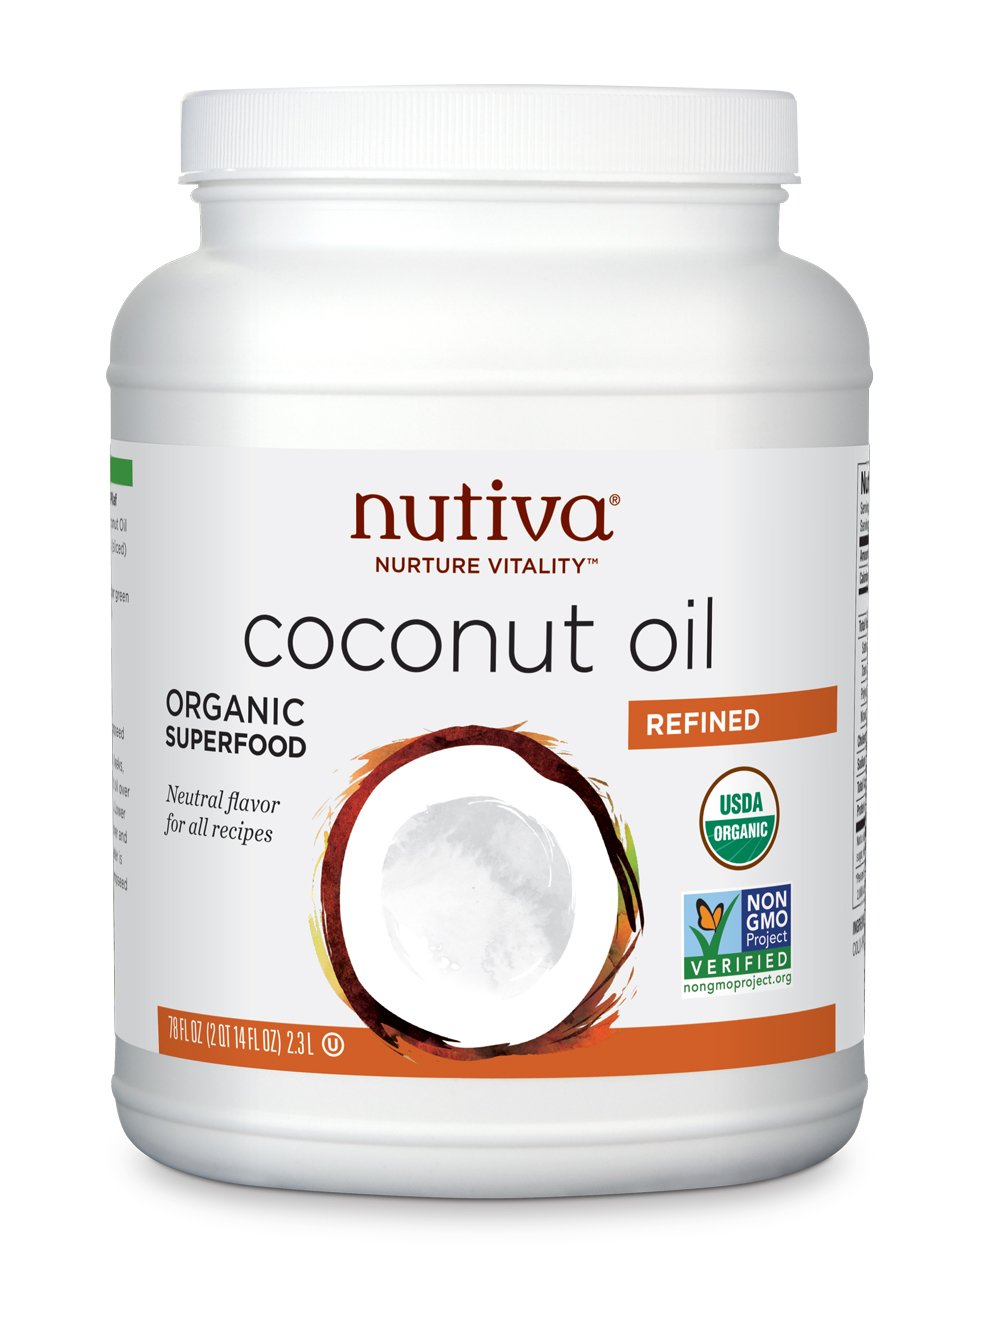 78-Oz Nutiva Organic Steam-Refined Coconut Oil $14.73 w/ S&S + Free Shipping w/ Prime or on orders $25+